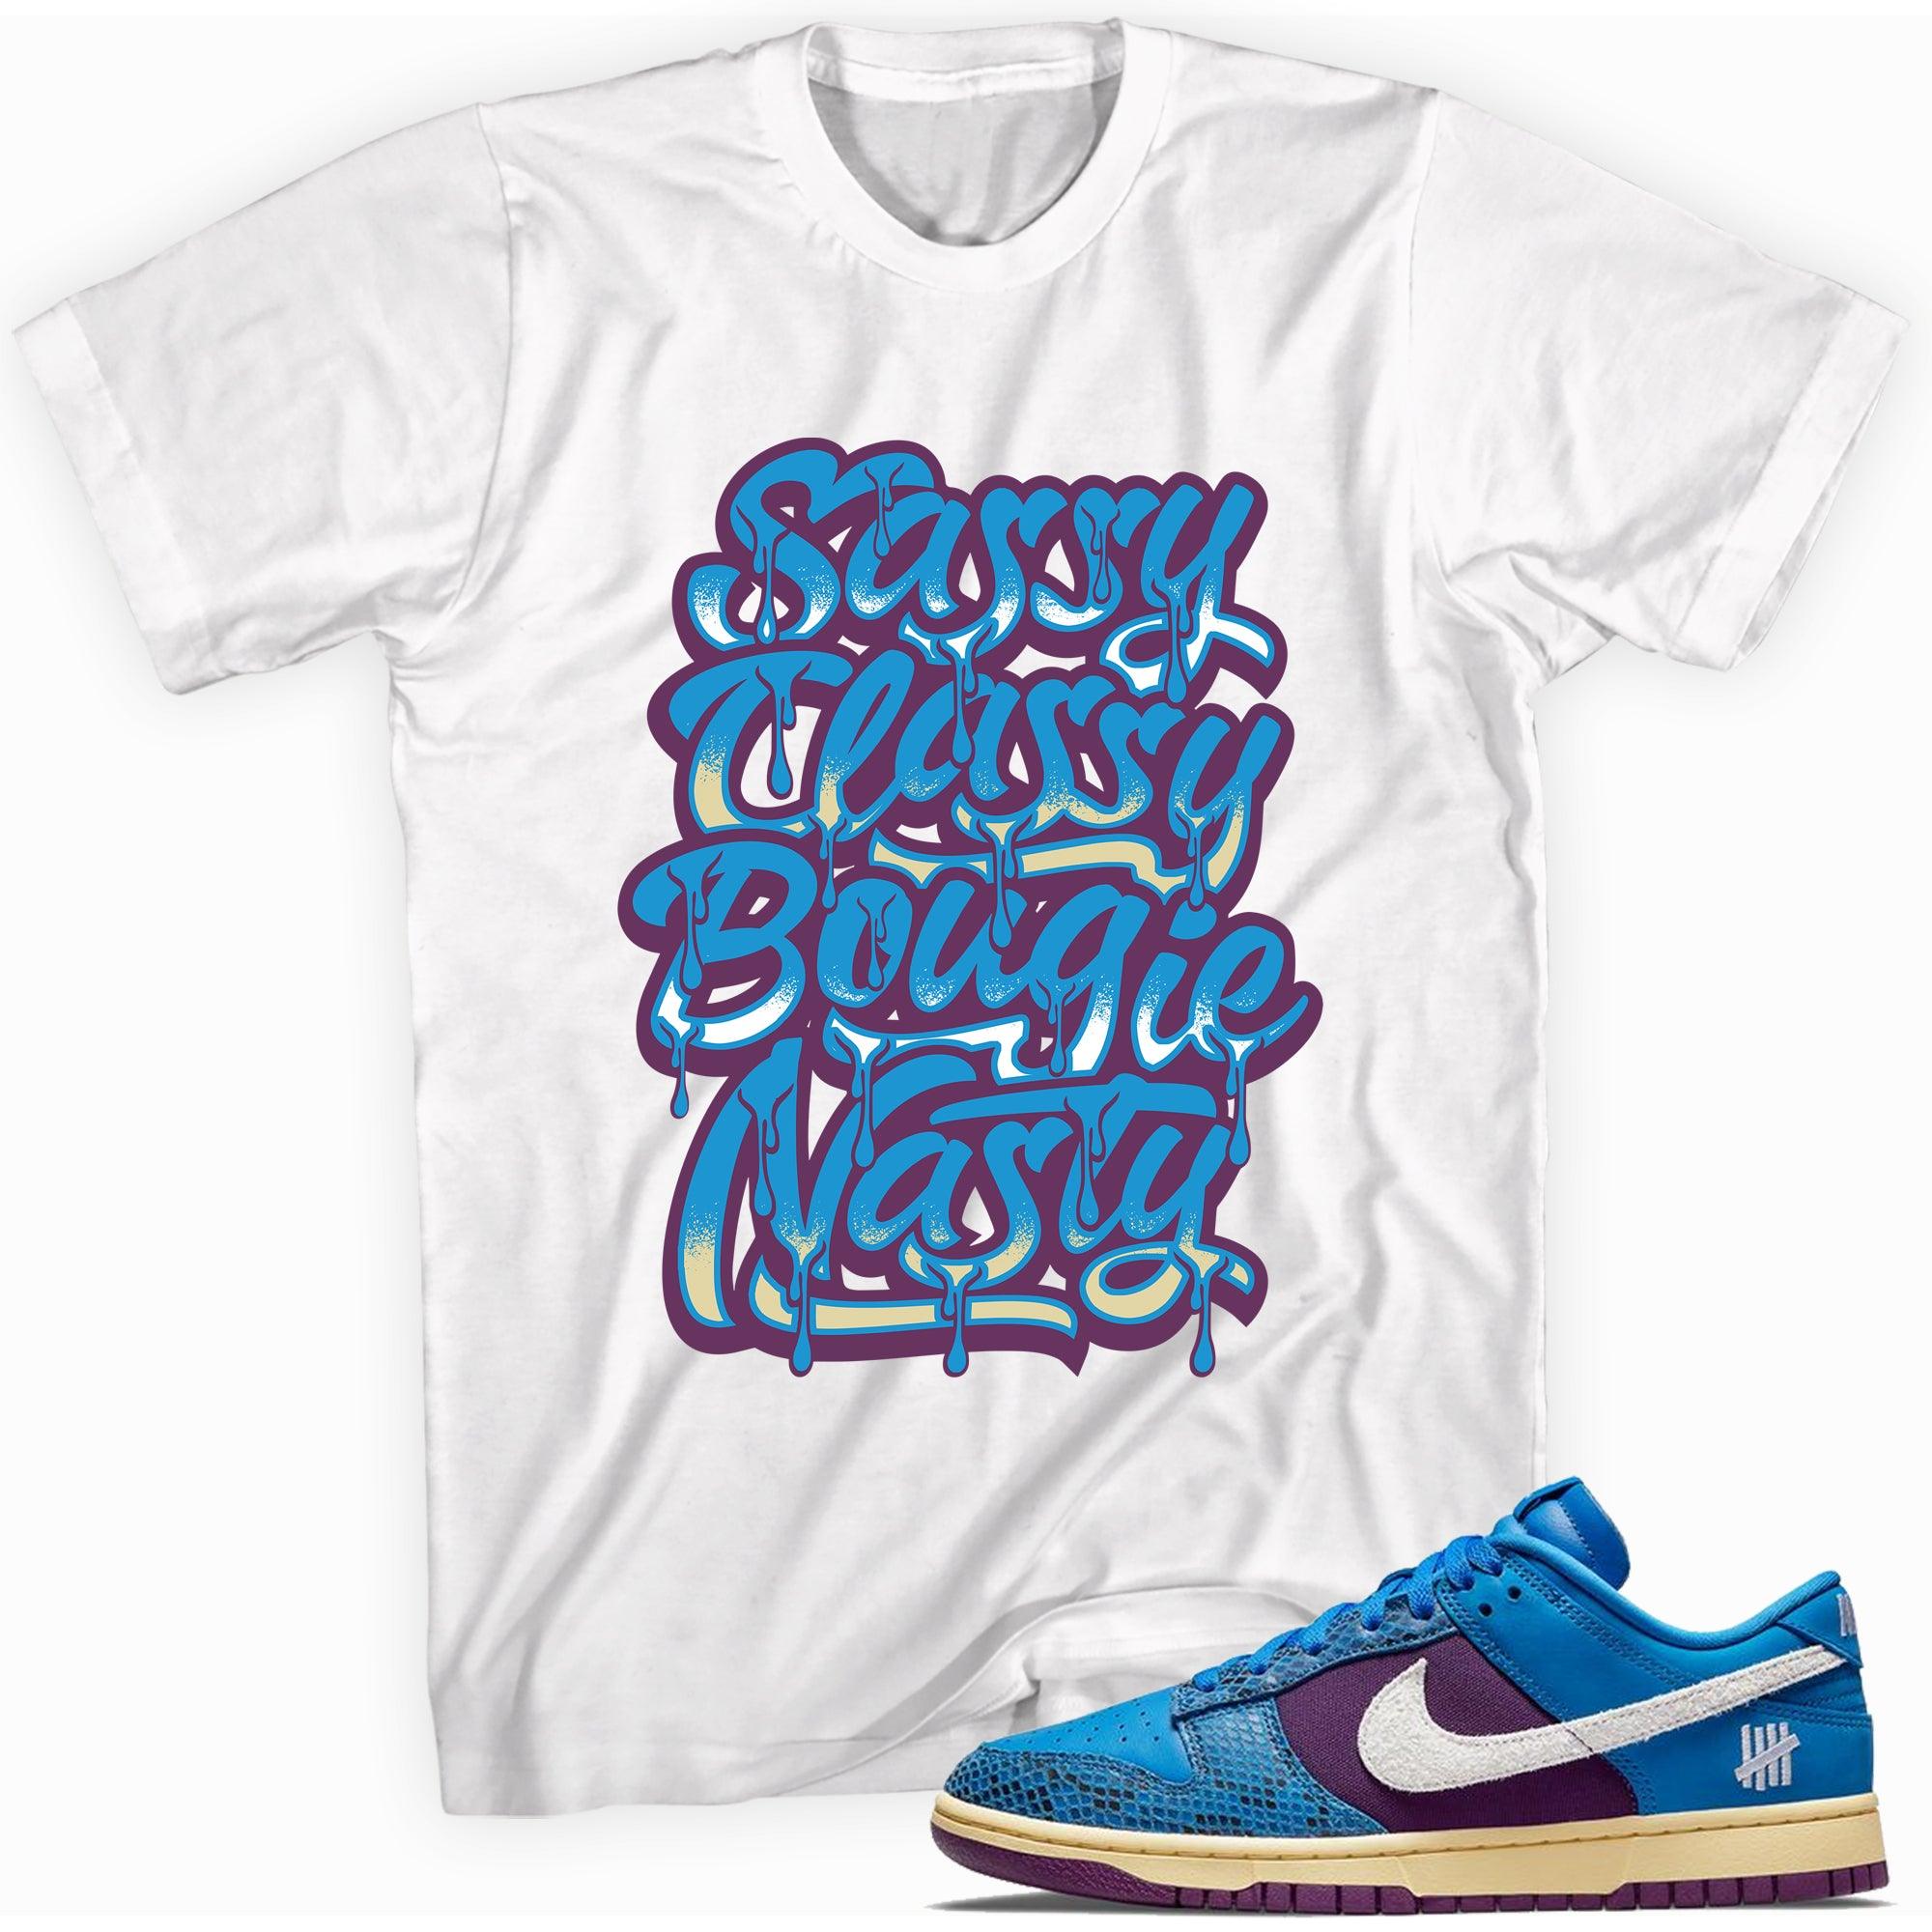 Sassy Classy Shirt Nike Dunk Low Undefeated 5 On It Dunk vs AF1 photo